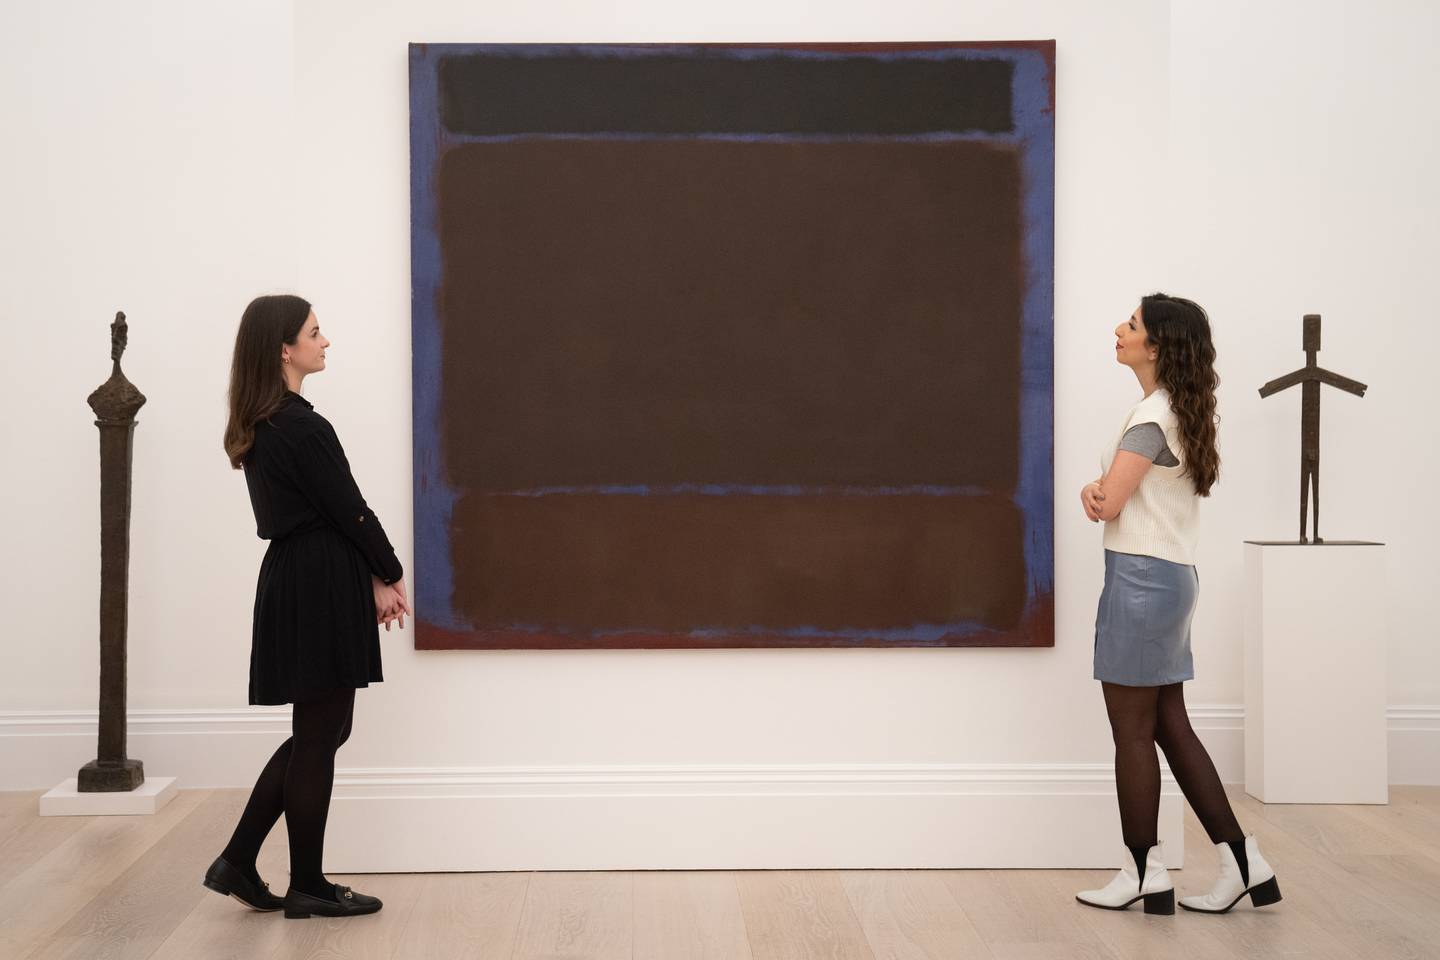 Gallery staff look at artworks from the Macklowe Collection during a photo call at Sotheby's in London before it was offered at auction in New York in February 2022. PA Wire